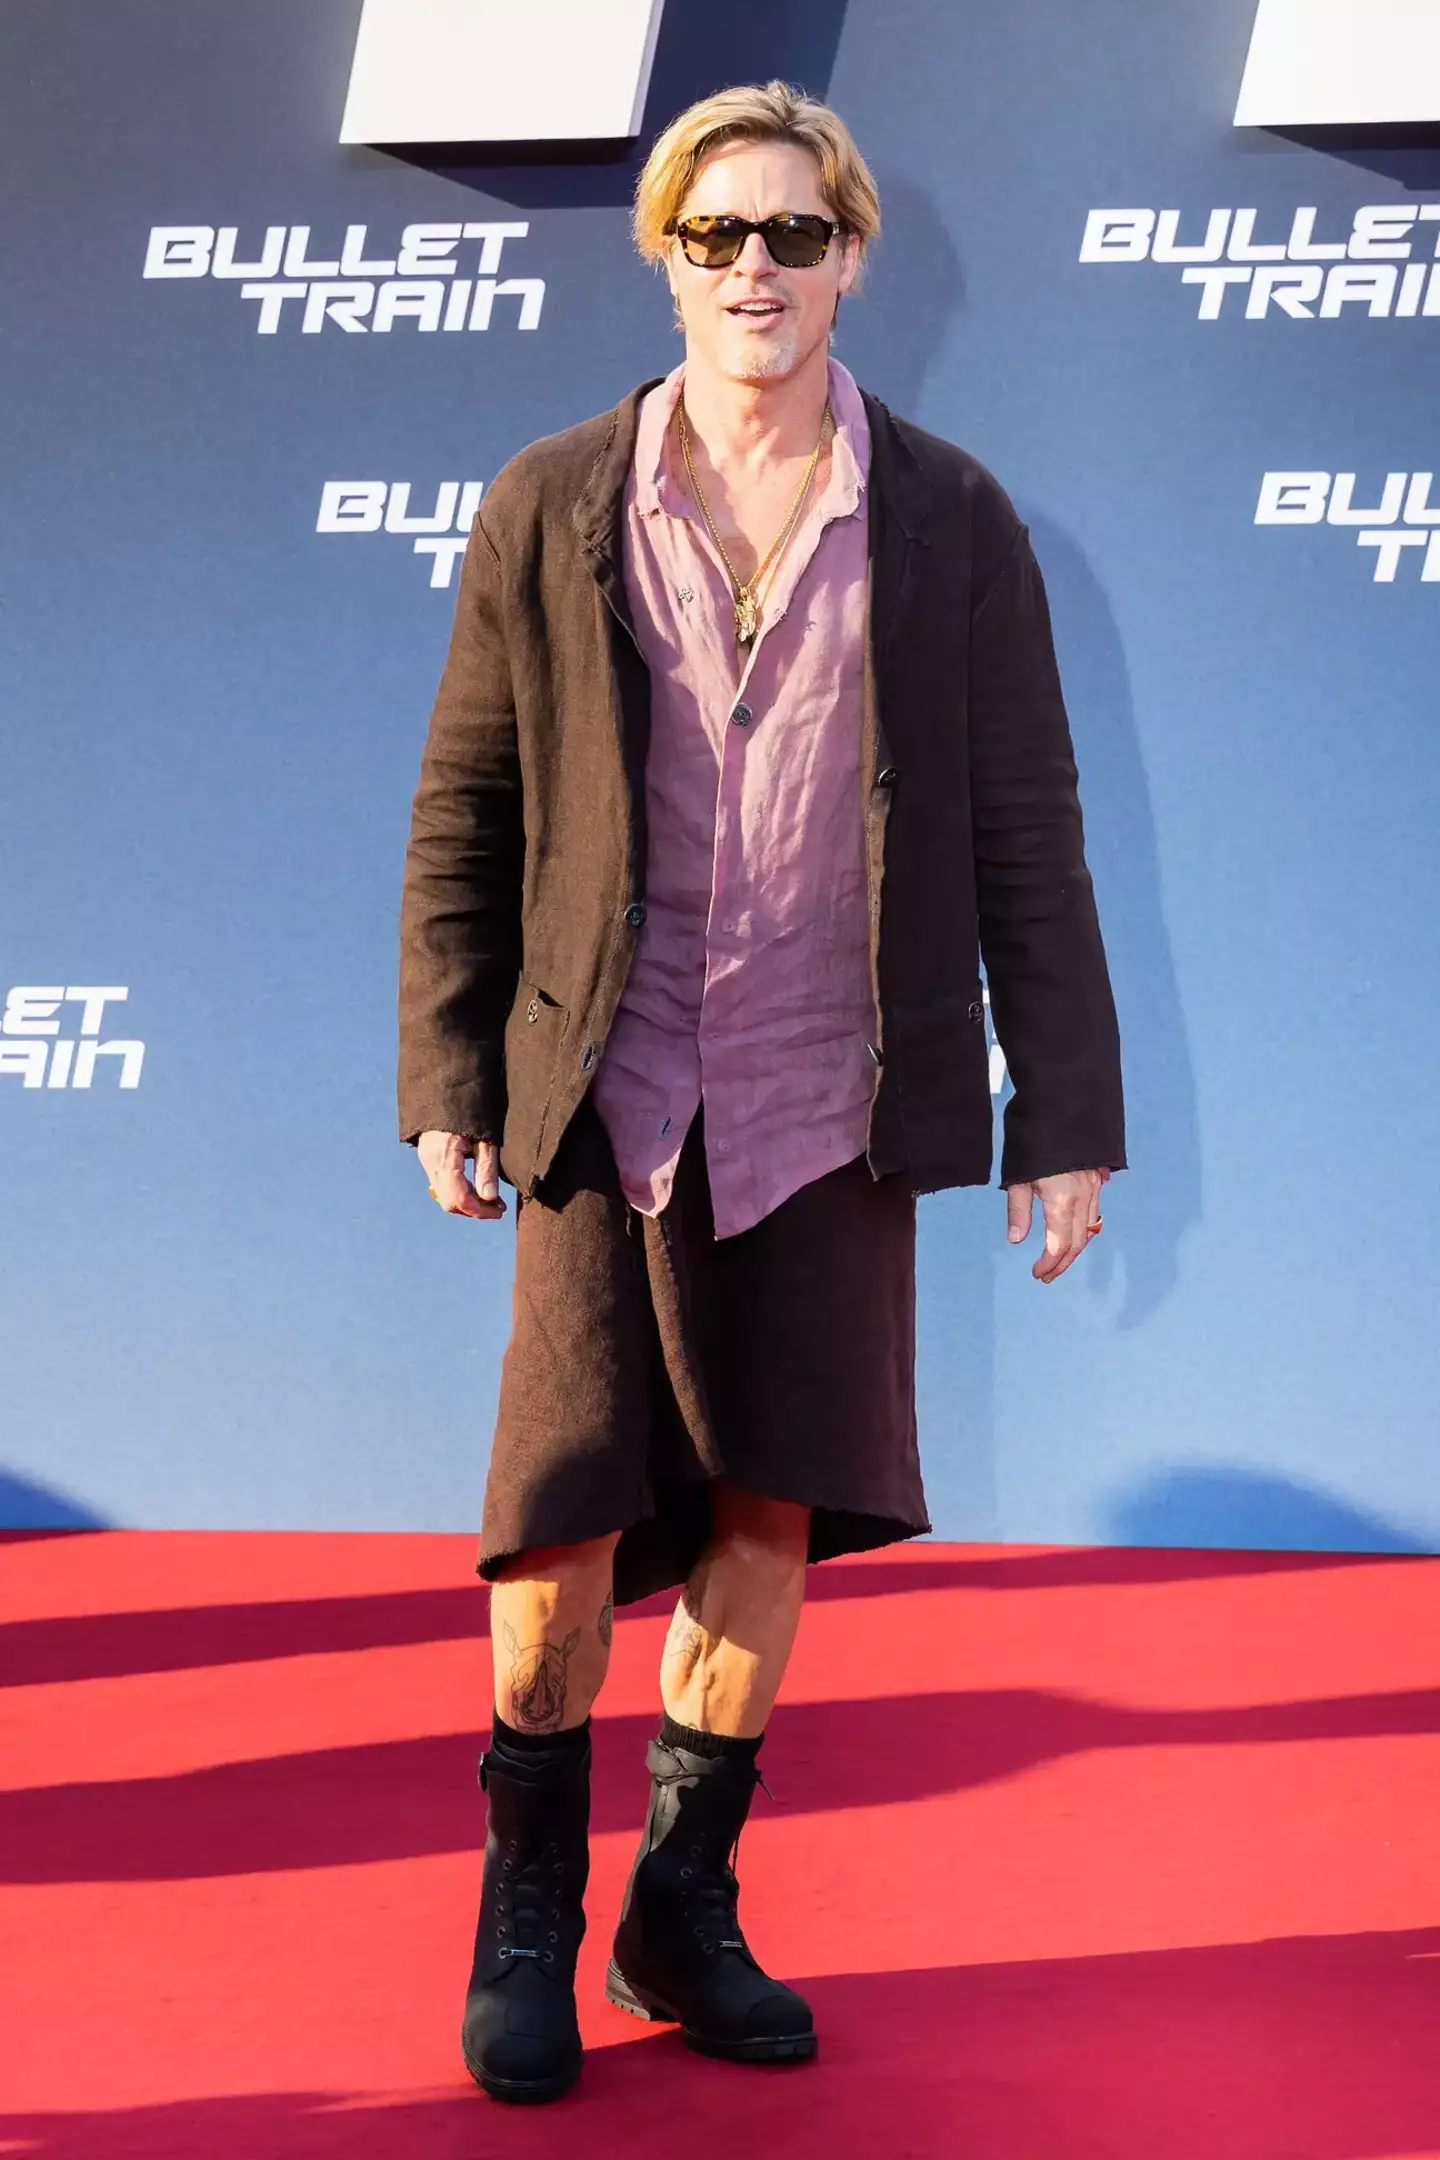 Brad Pitt looked sick at the Berlin premiere of Bullet Train in a linen skirt.